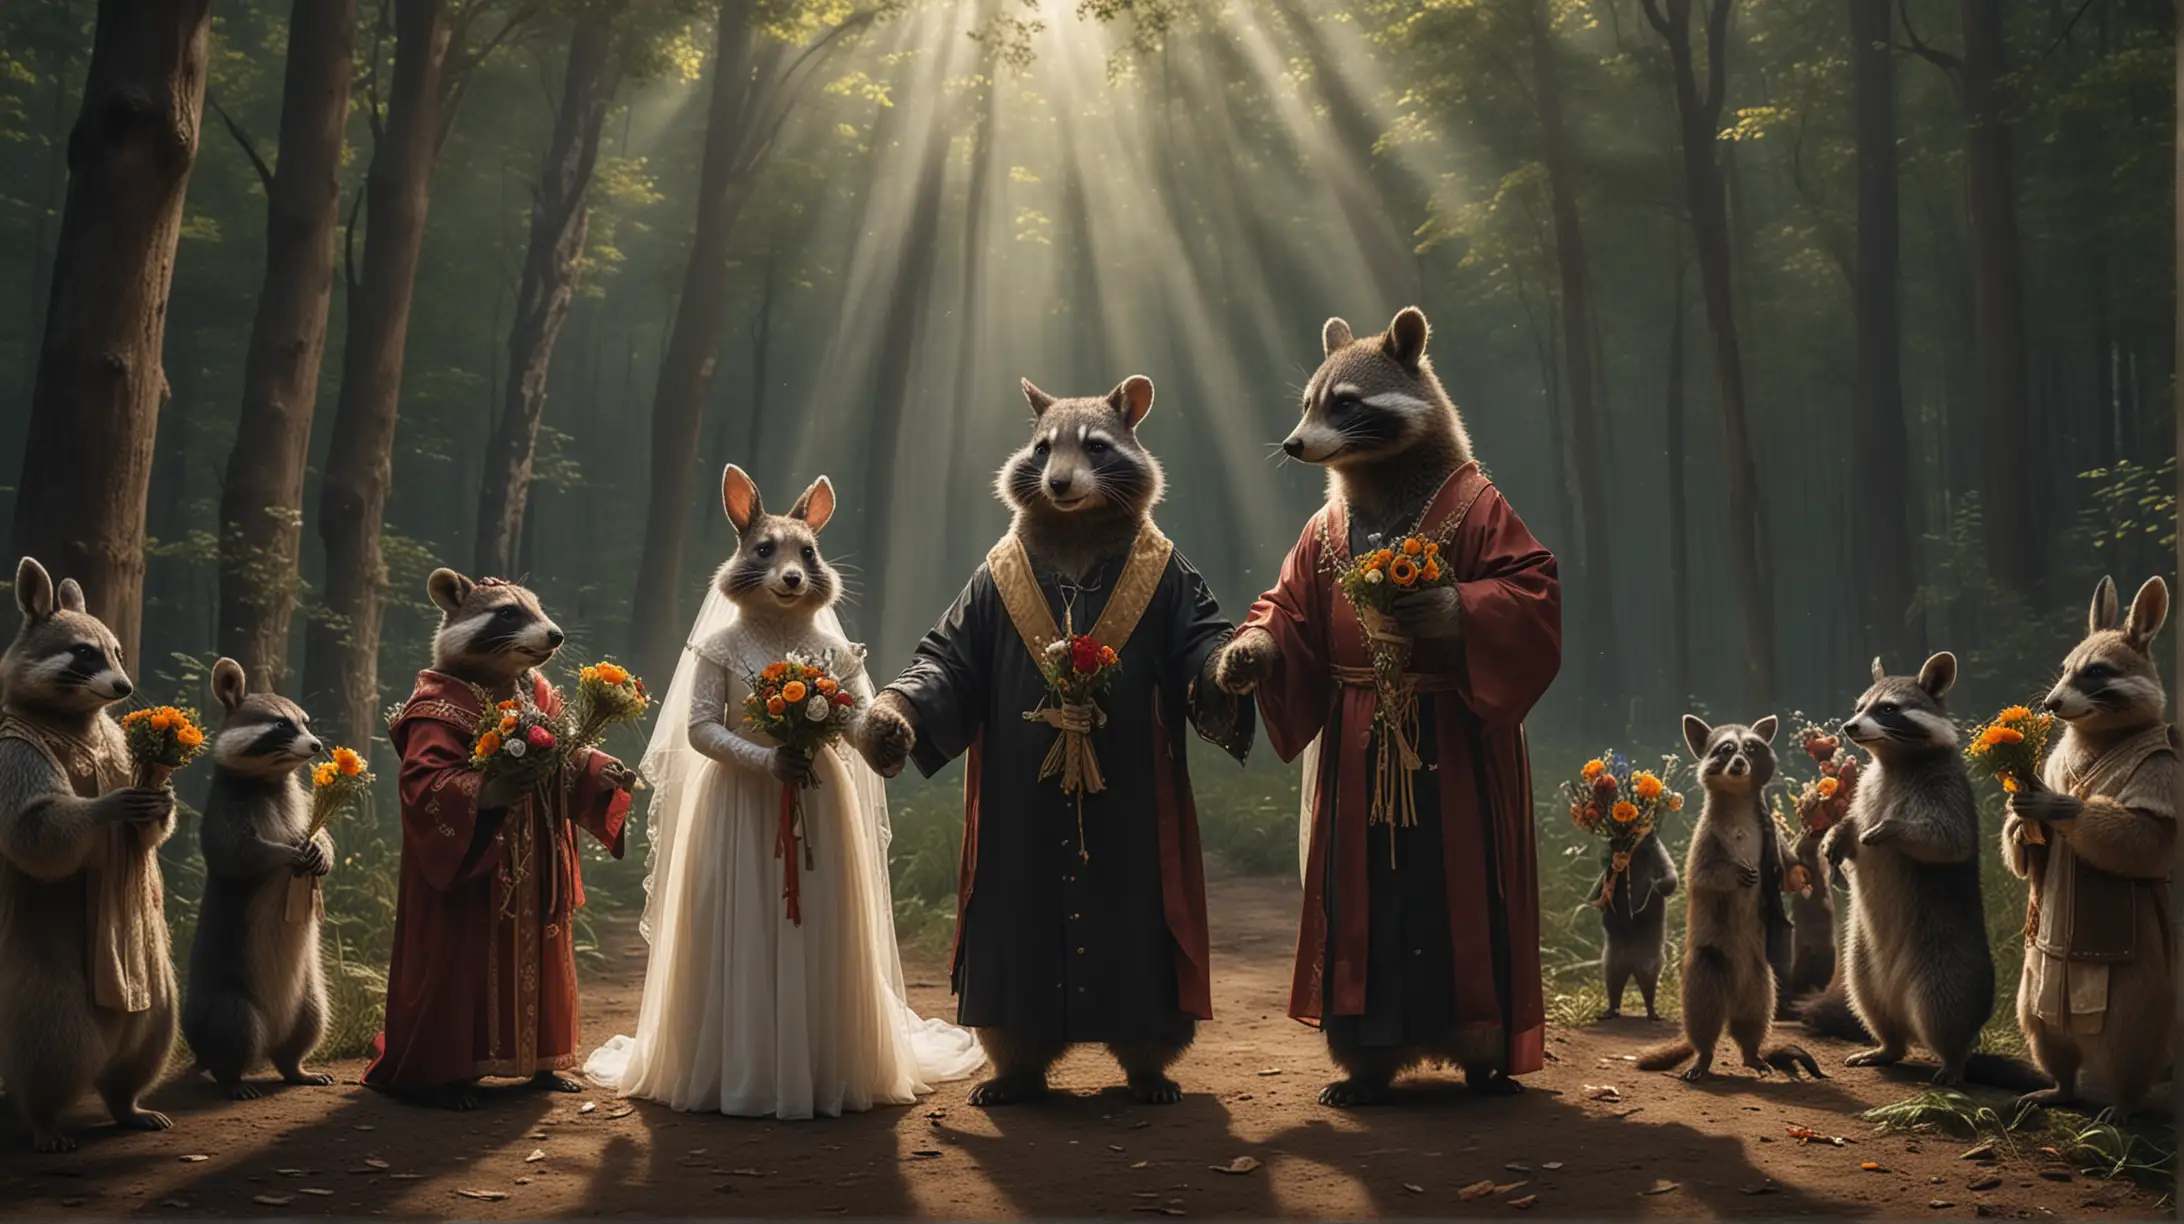 Forest Wedding Rabbit and Raccoon Marriage Ceremony with Bear Minister